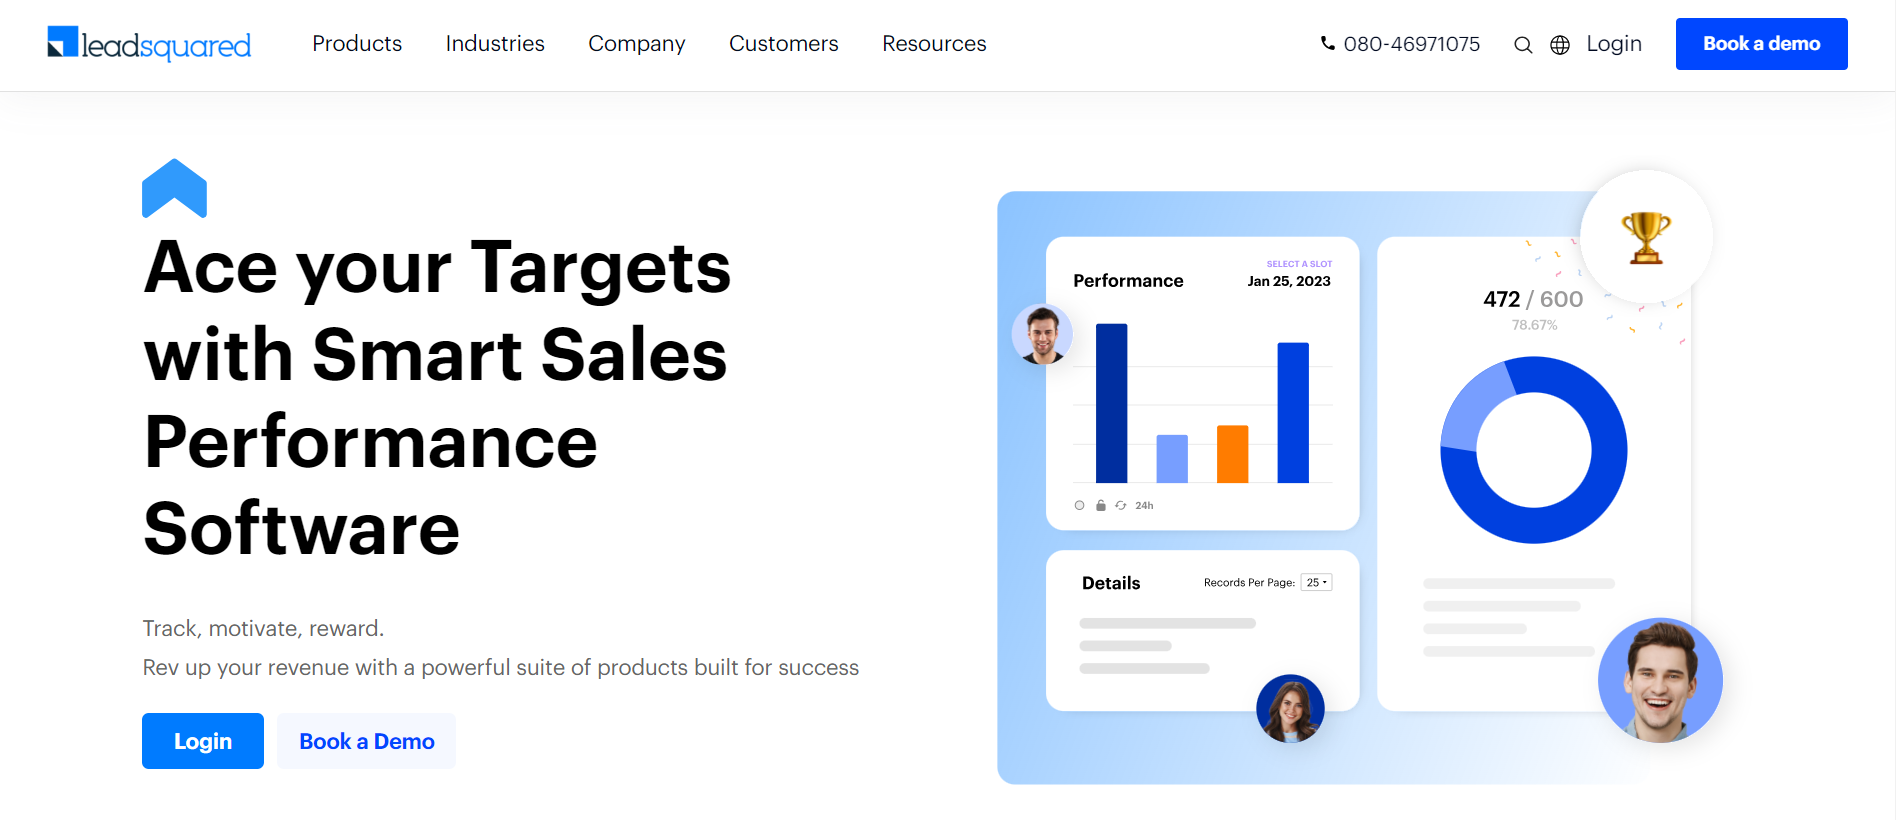 Leadsquared sales gamification tools